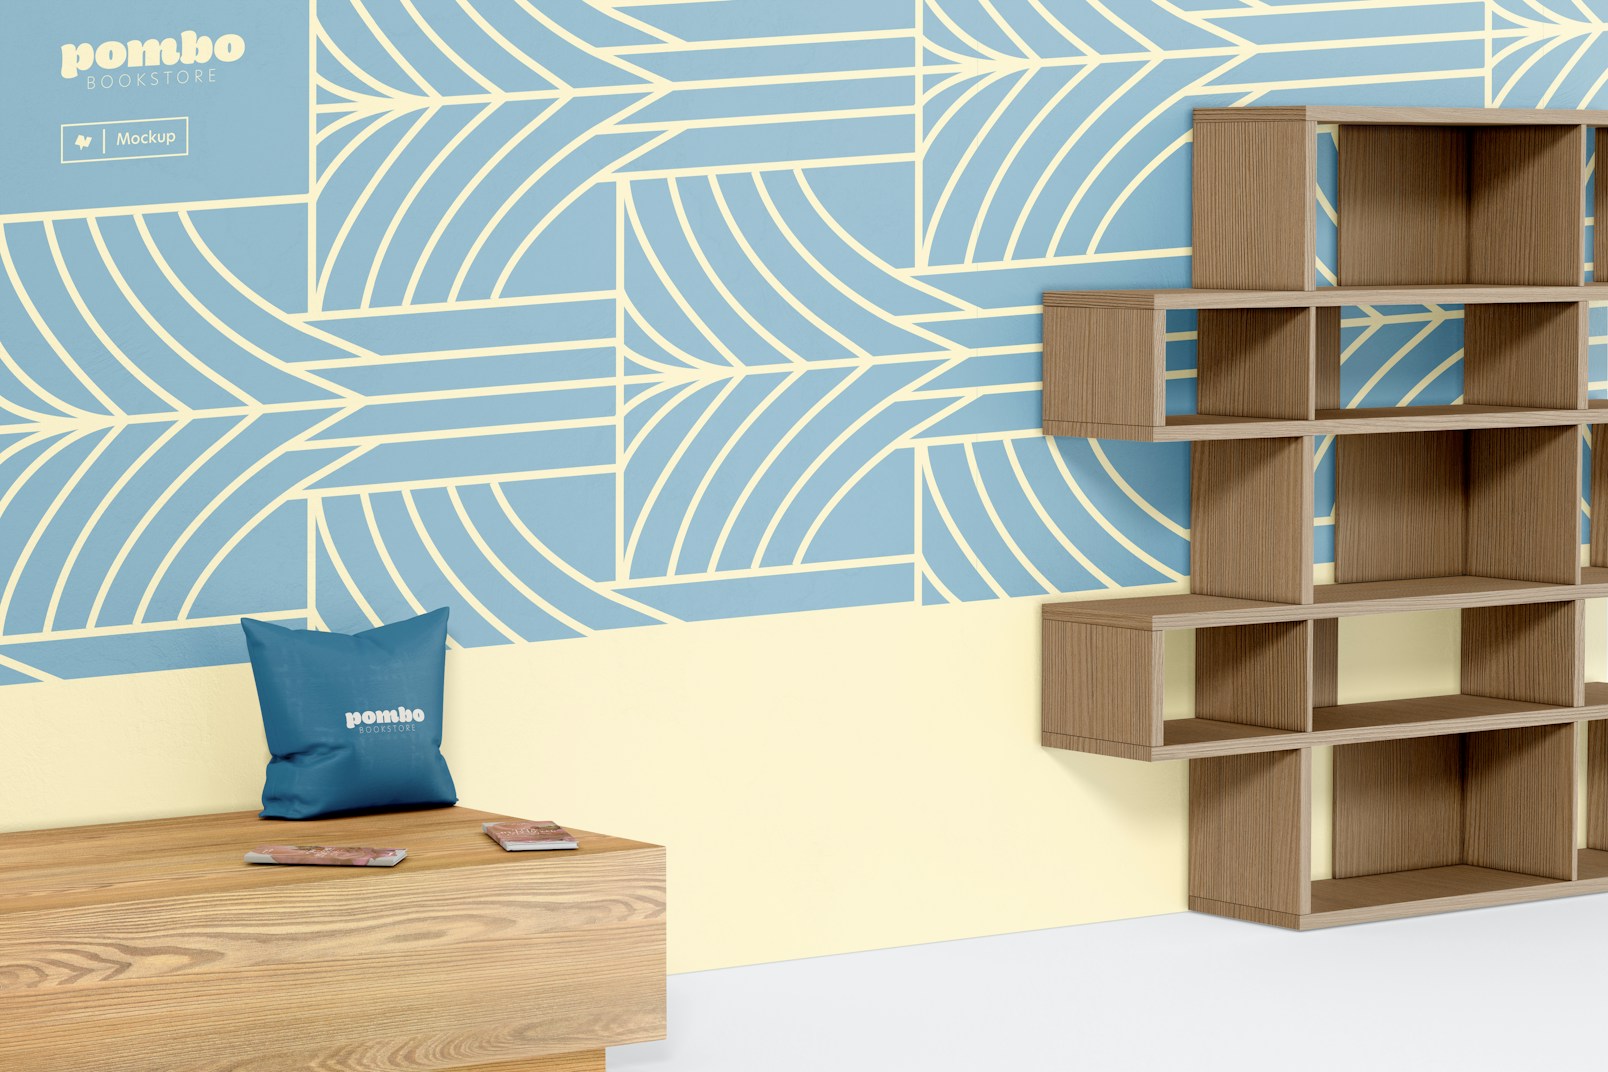 Modern Bookstore Wall Mockup, with Bench